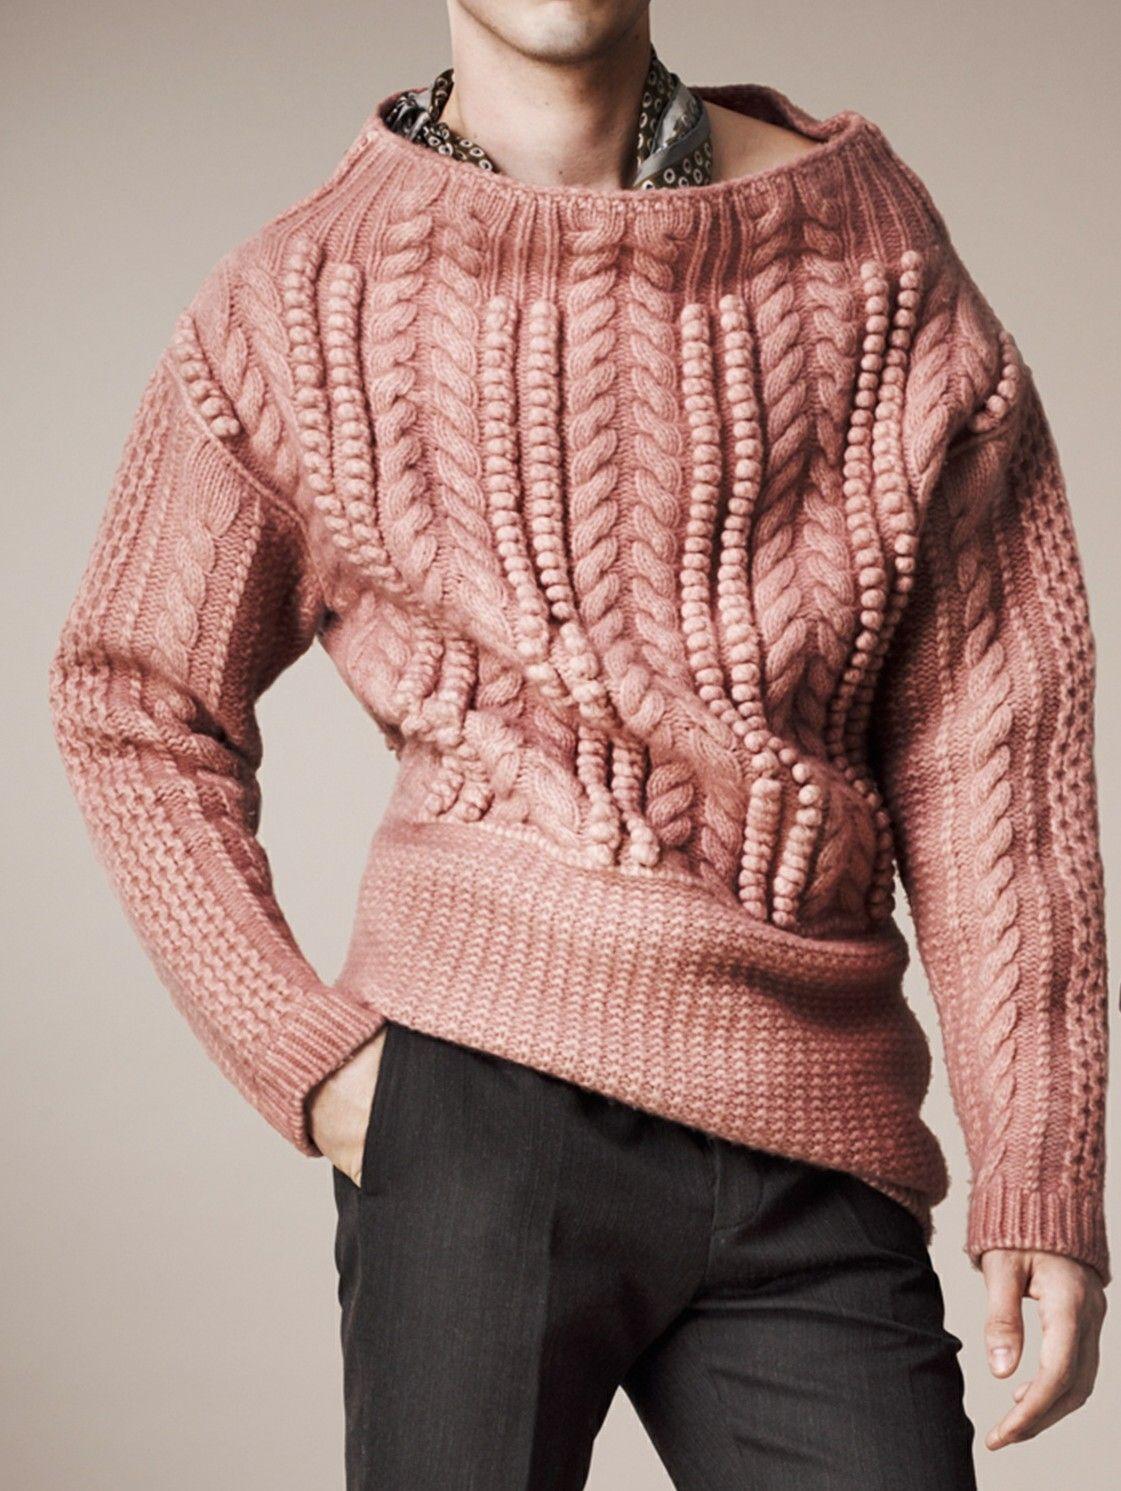 BURBERRY PRORSUM Resort 2013 Size XL Rose Cable Knit Wool Sweater In Excellent Condition For Sale In San Francisco, CA